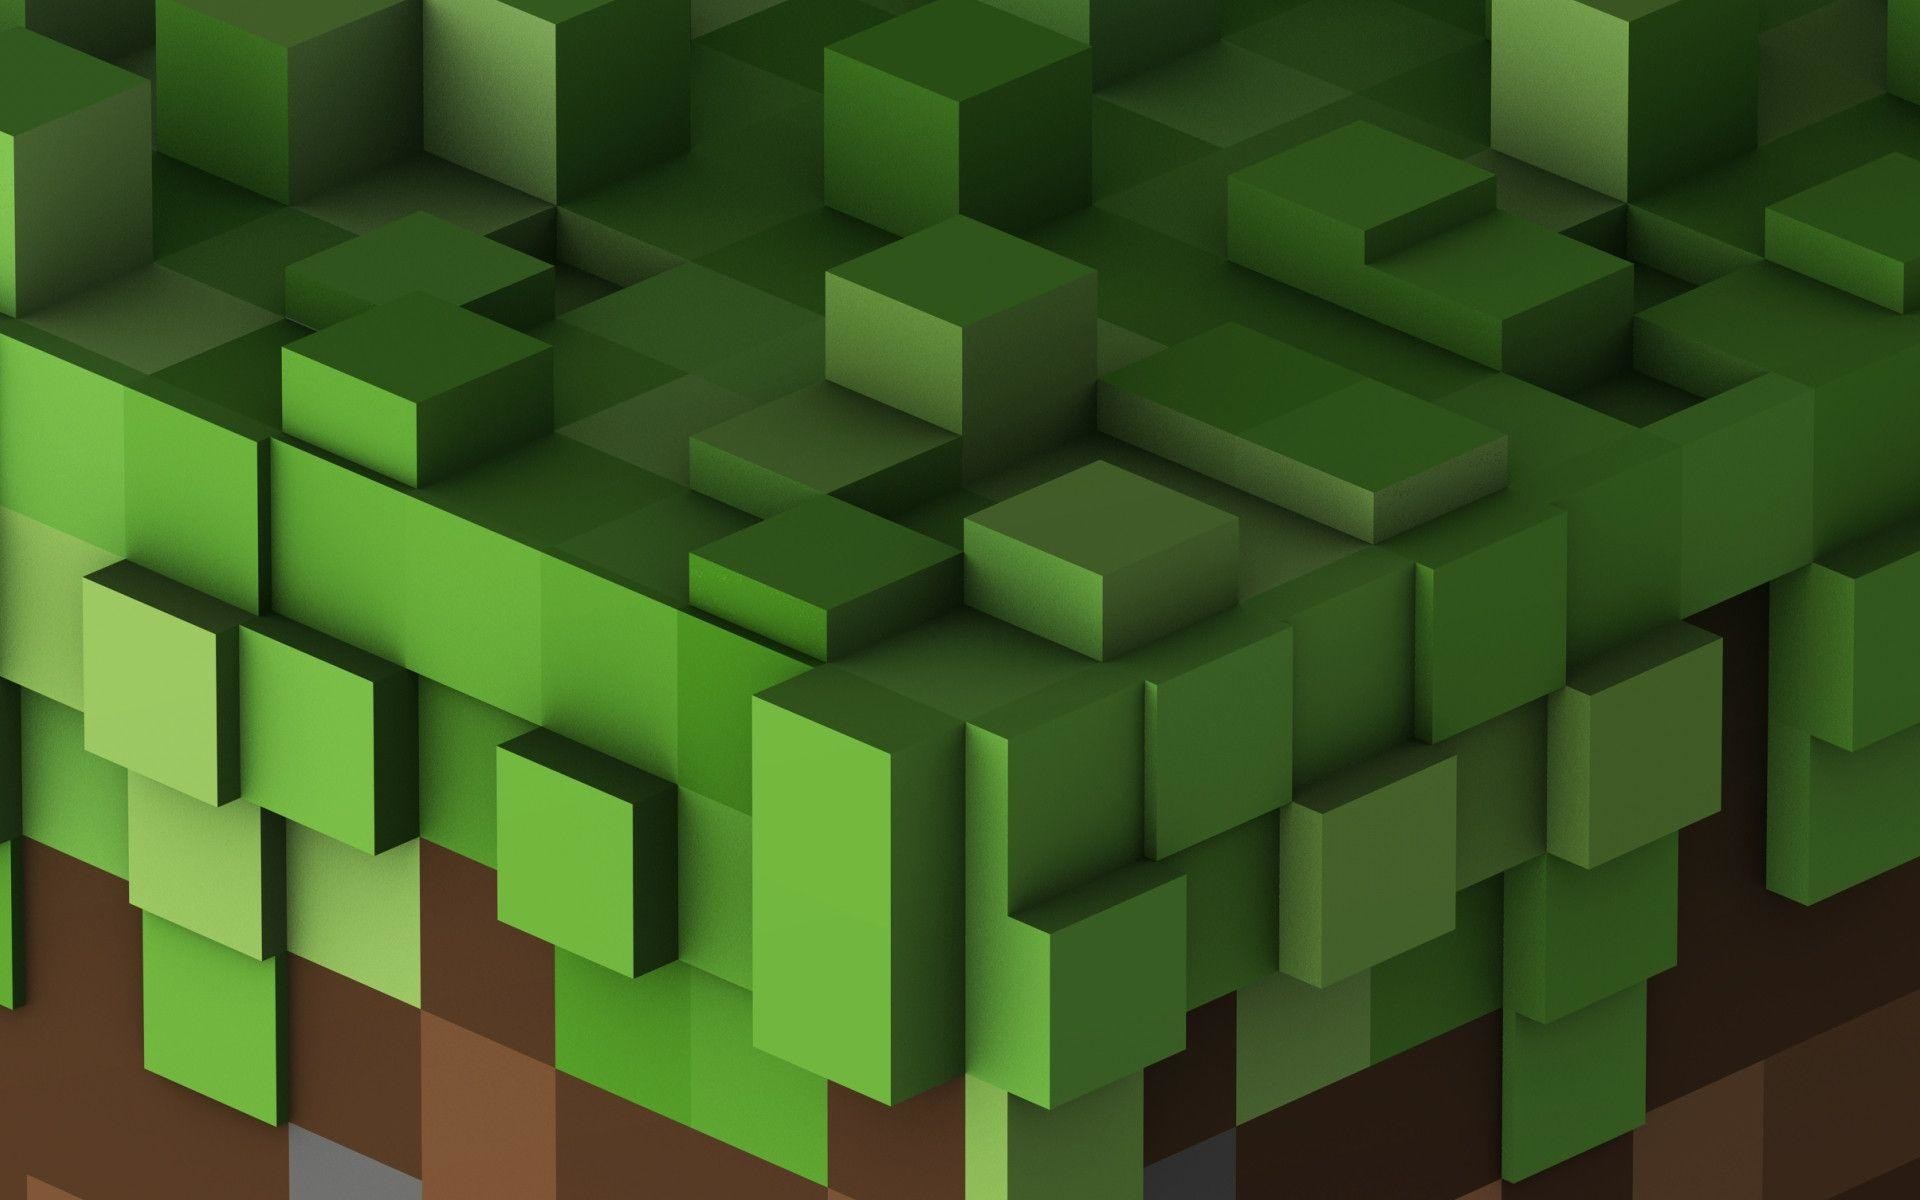 1920x1200 225 Minecraft Wallpapers | Minecraft Backgrounds